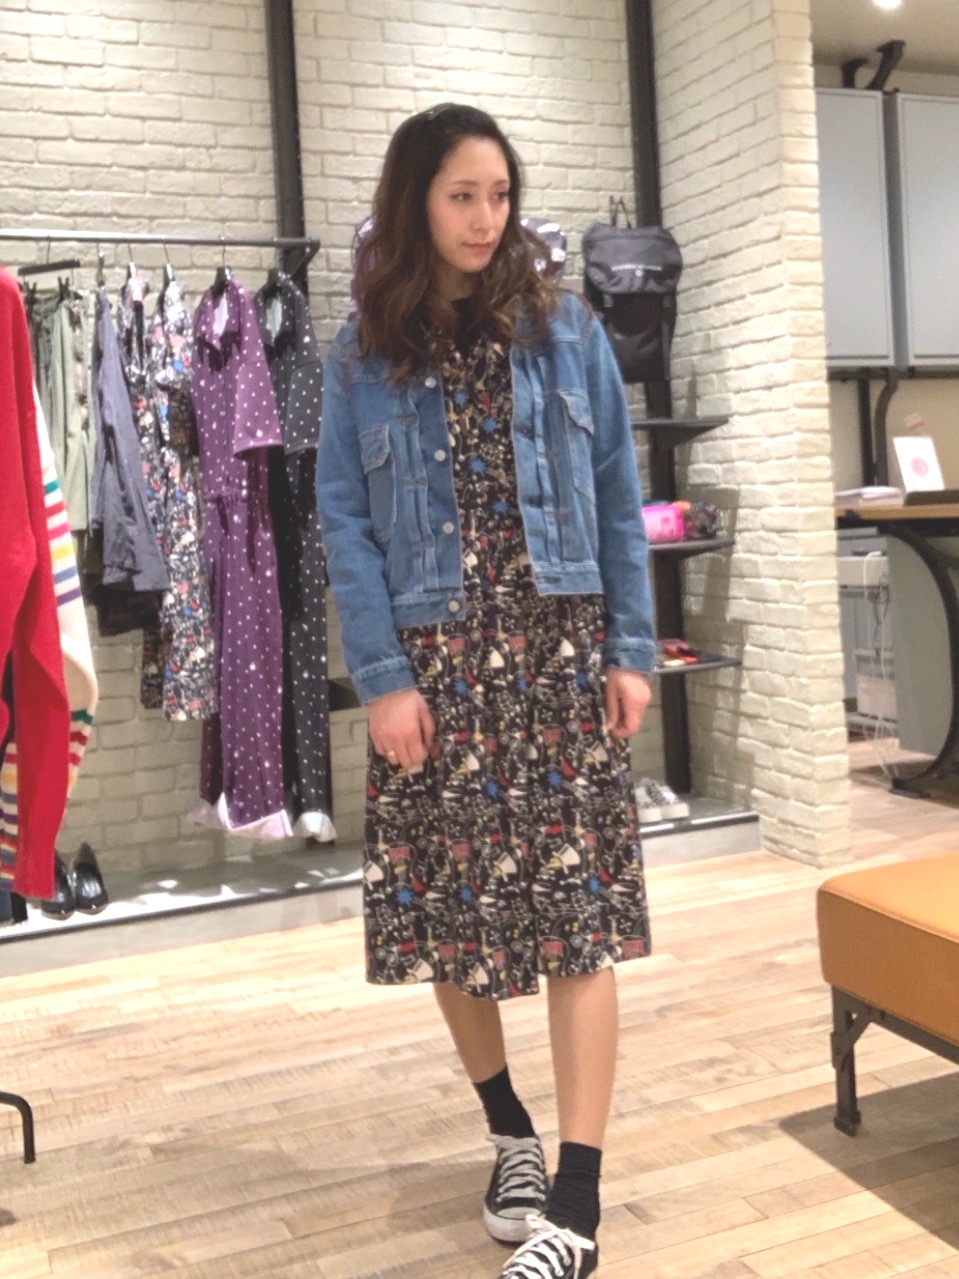 HYSTERIC GLAMOUR札幌ステラプレイス店